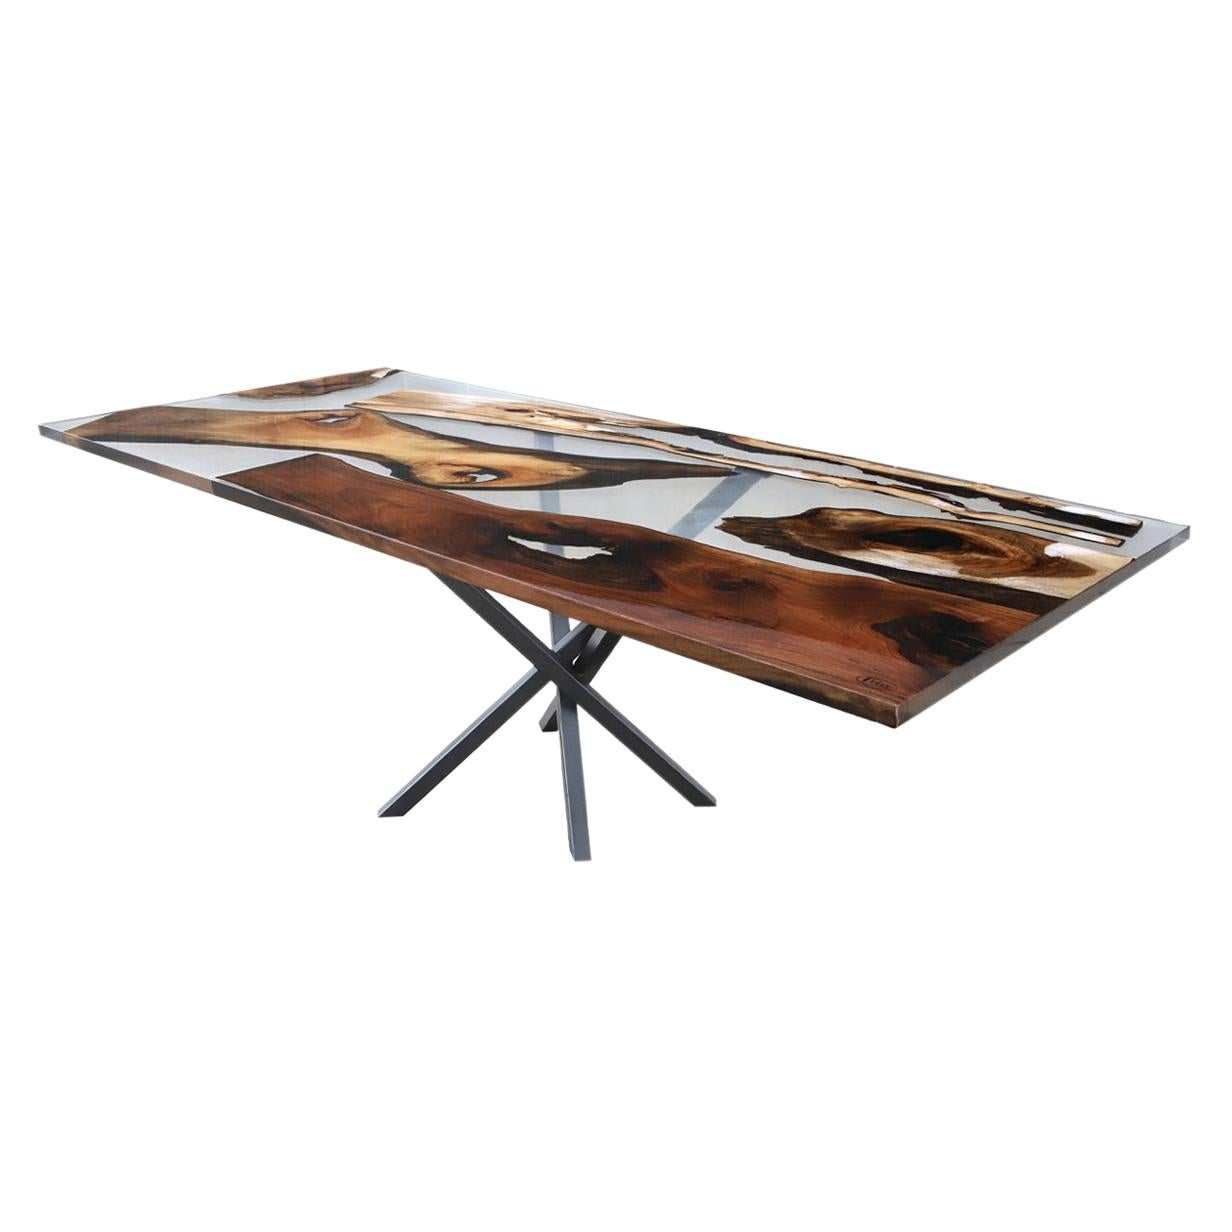 Stoccolma Dining Table